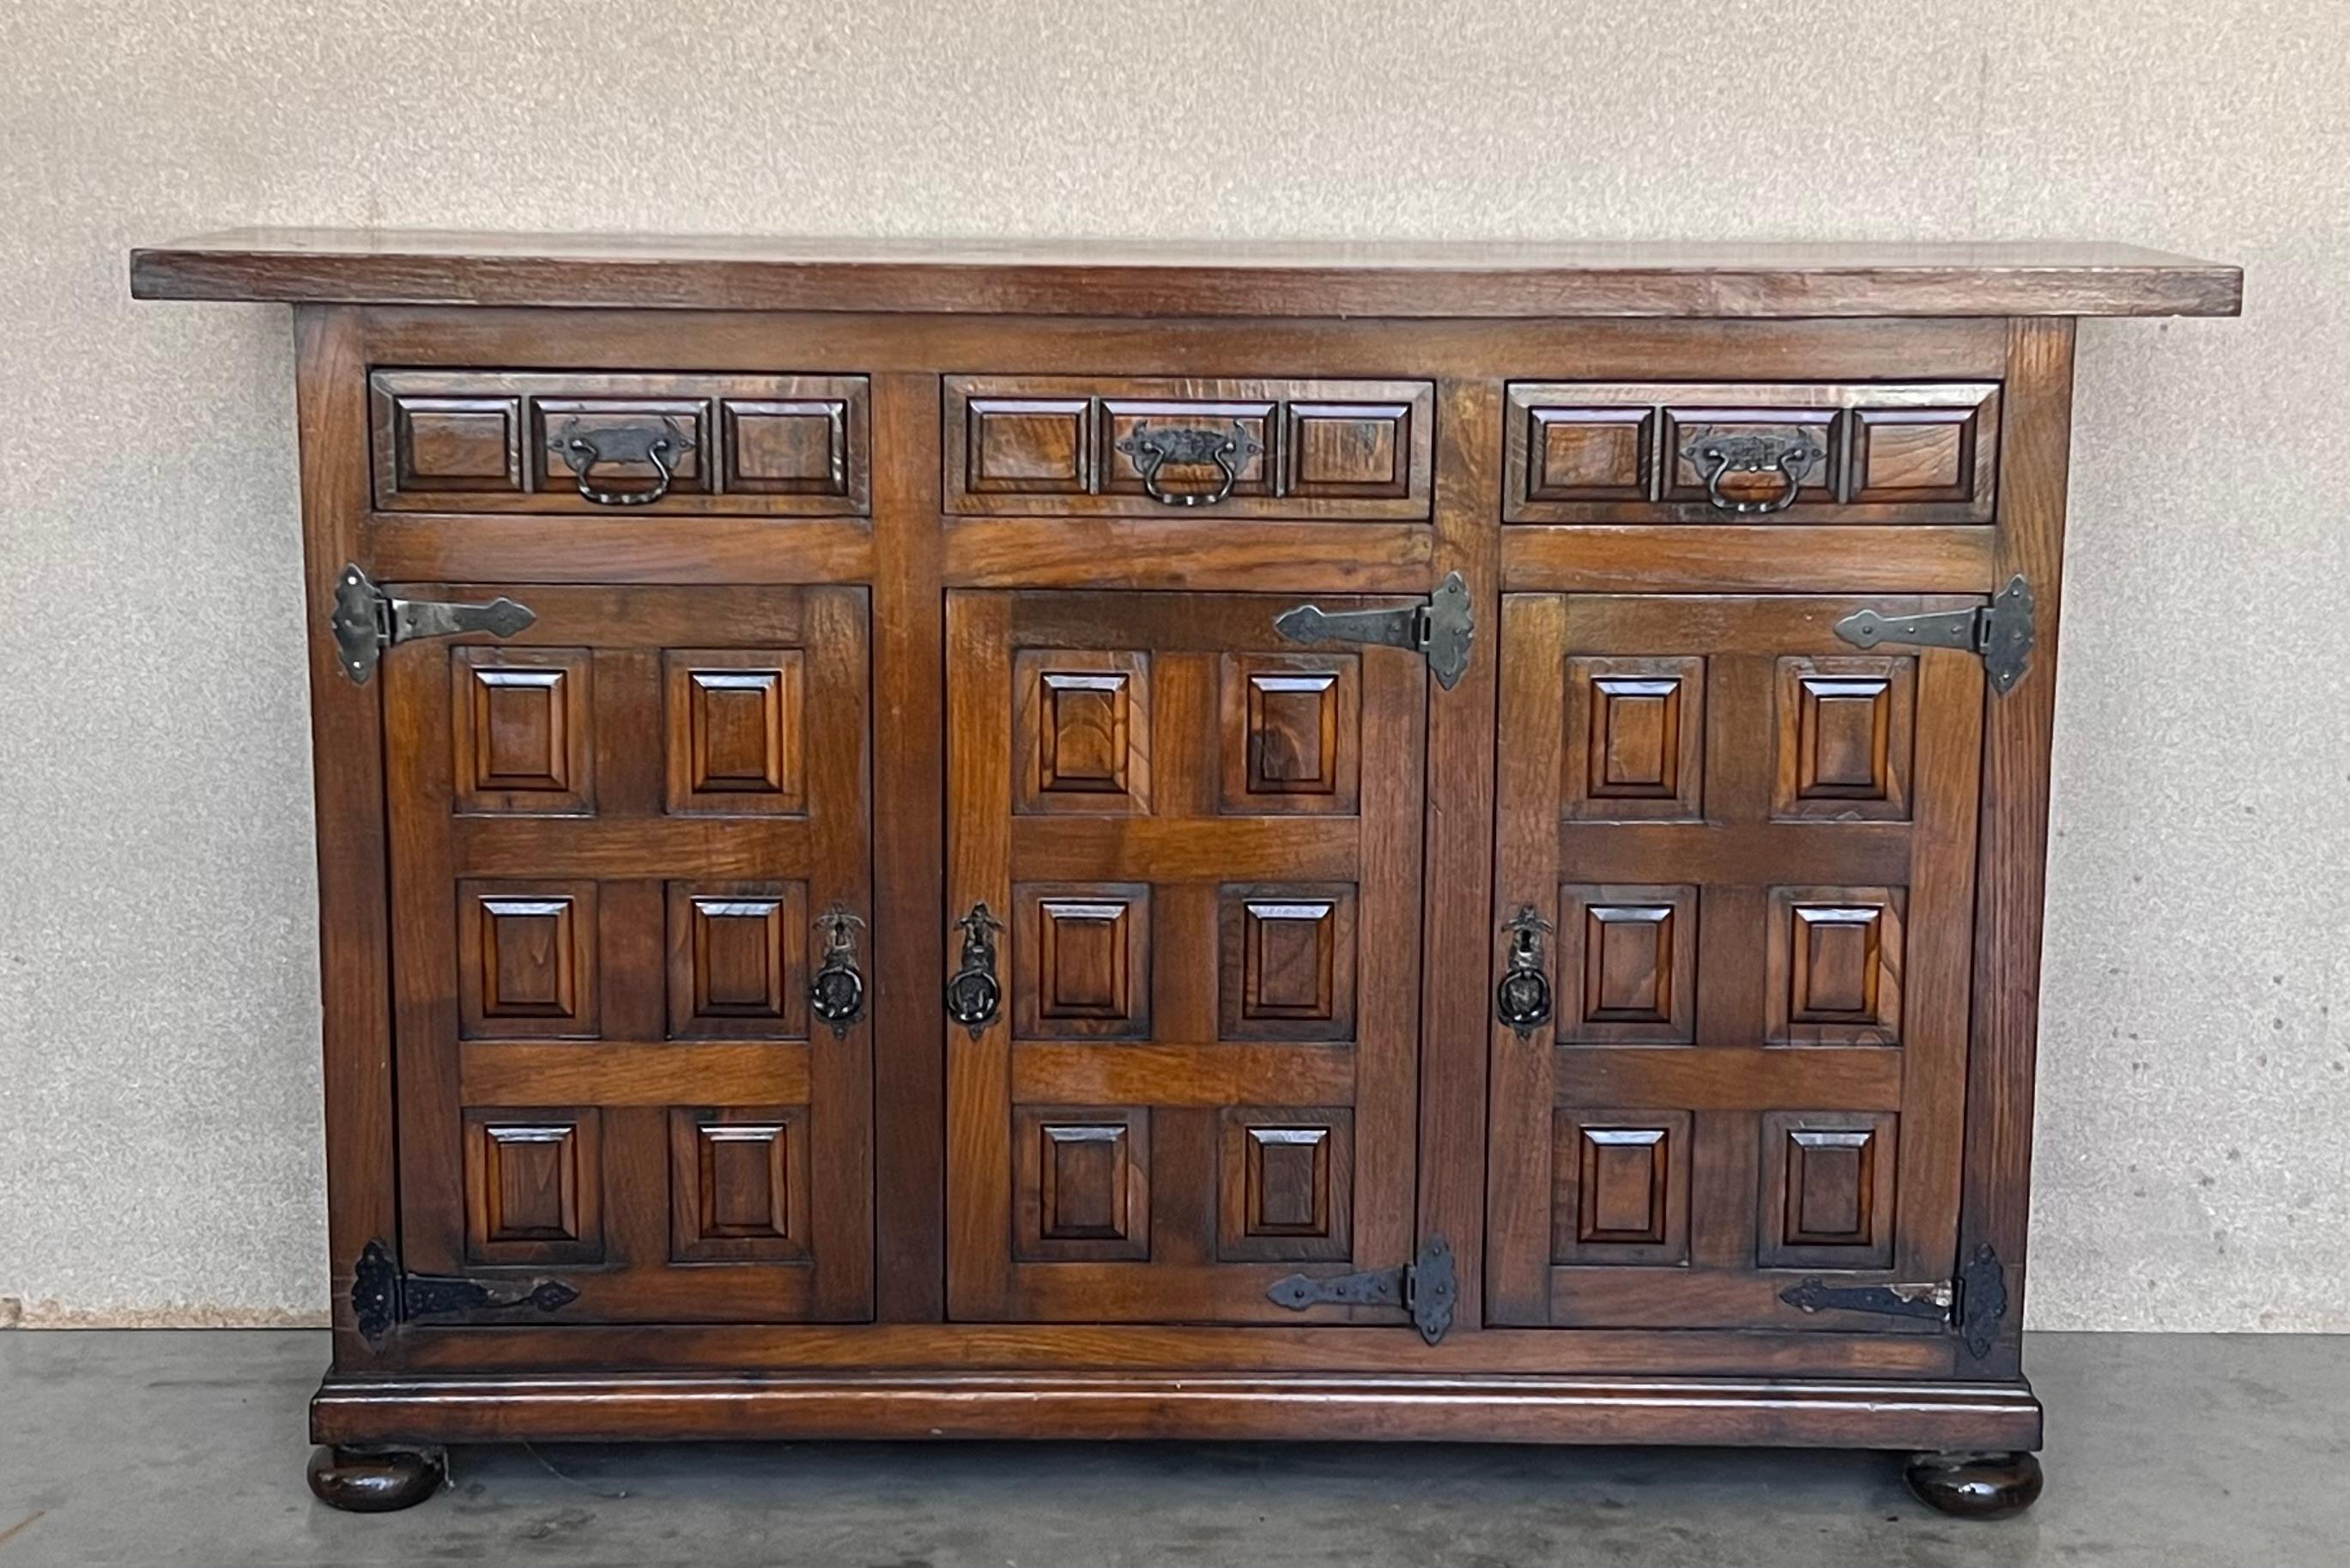 From Spain, constructed of solid walnut, the rectangular top without edge top, conforming case housing two carved drawers with two doors paneled with solid walnut, raised on a plinth base.
Very heavy and original cabinet.